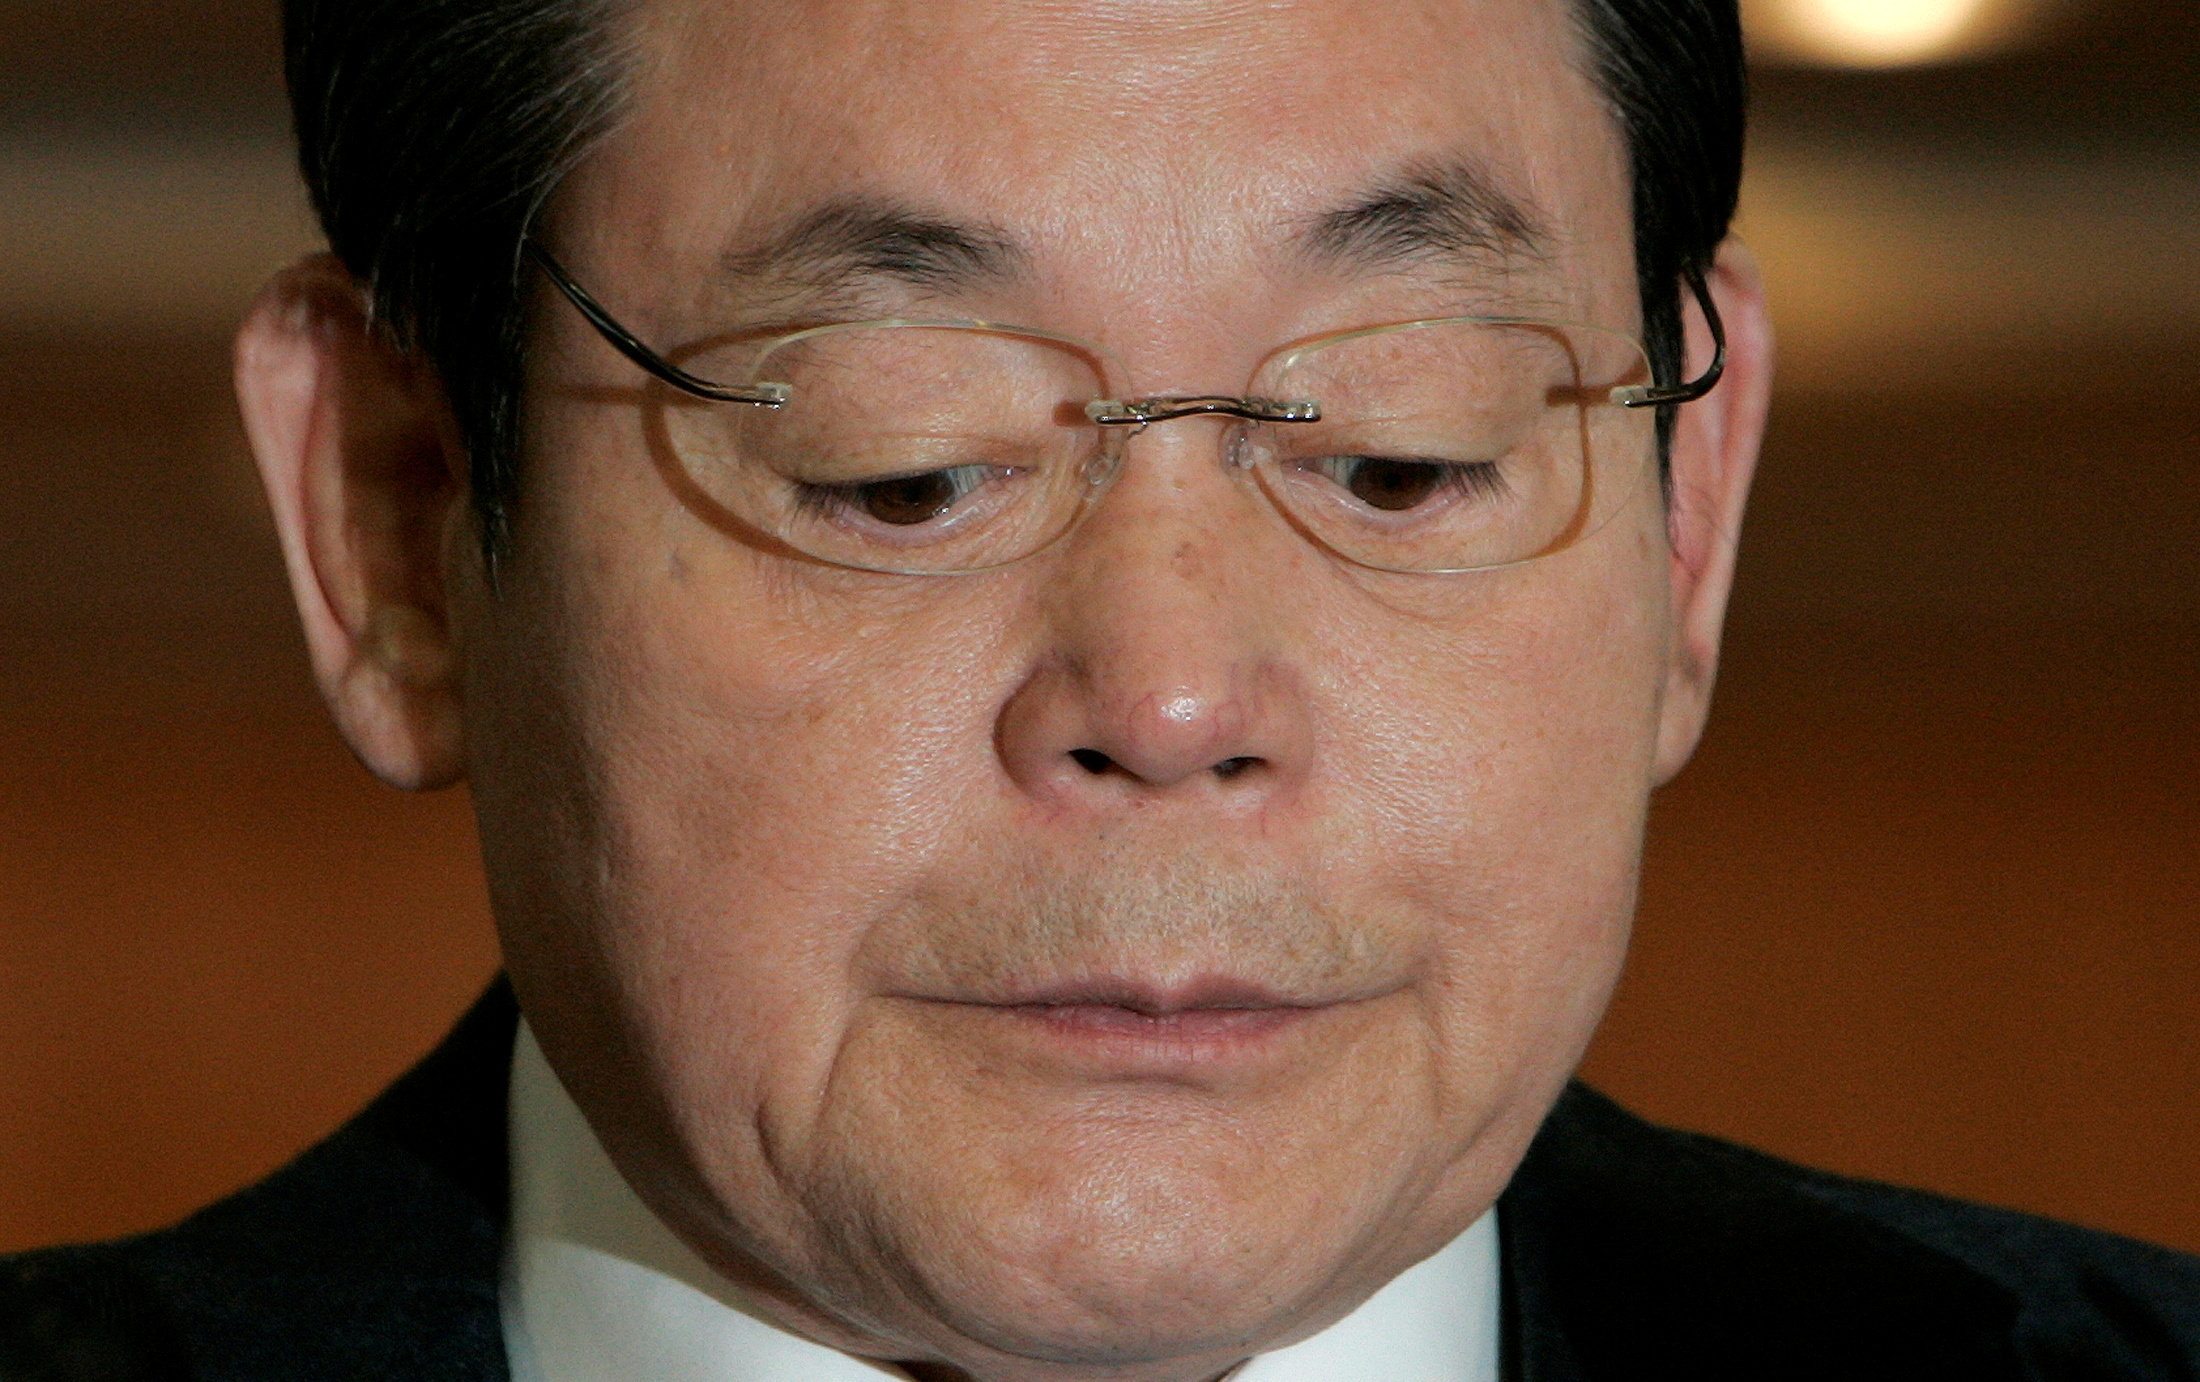 Samsung Group Chairman Lee Kun-hee reacts during a news conference regarding his resignation at the company's headquarters in Seoul April 22, 2008.REUTERS/Jo Yong-Hak